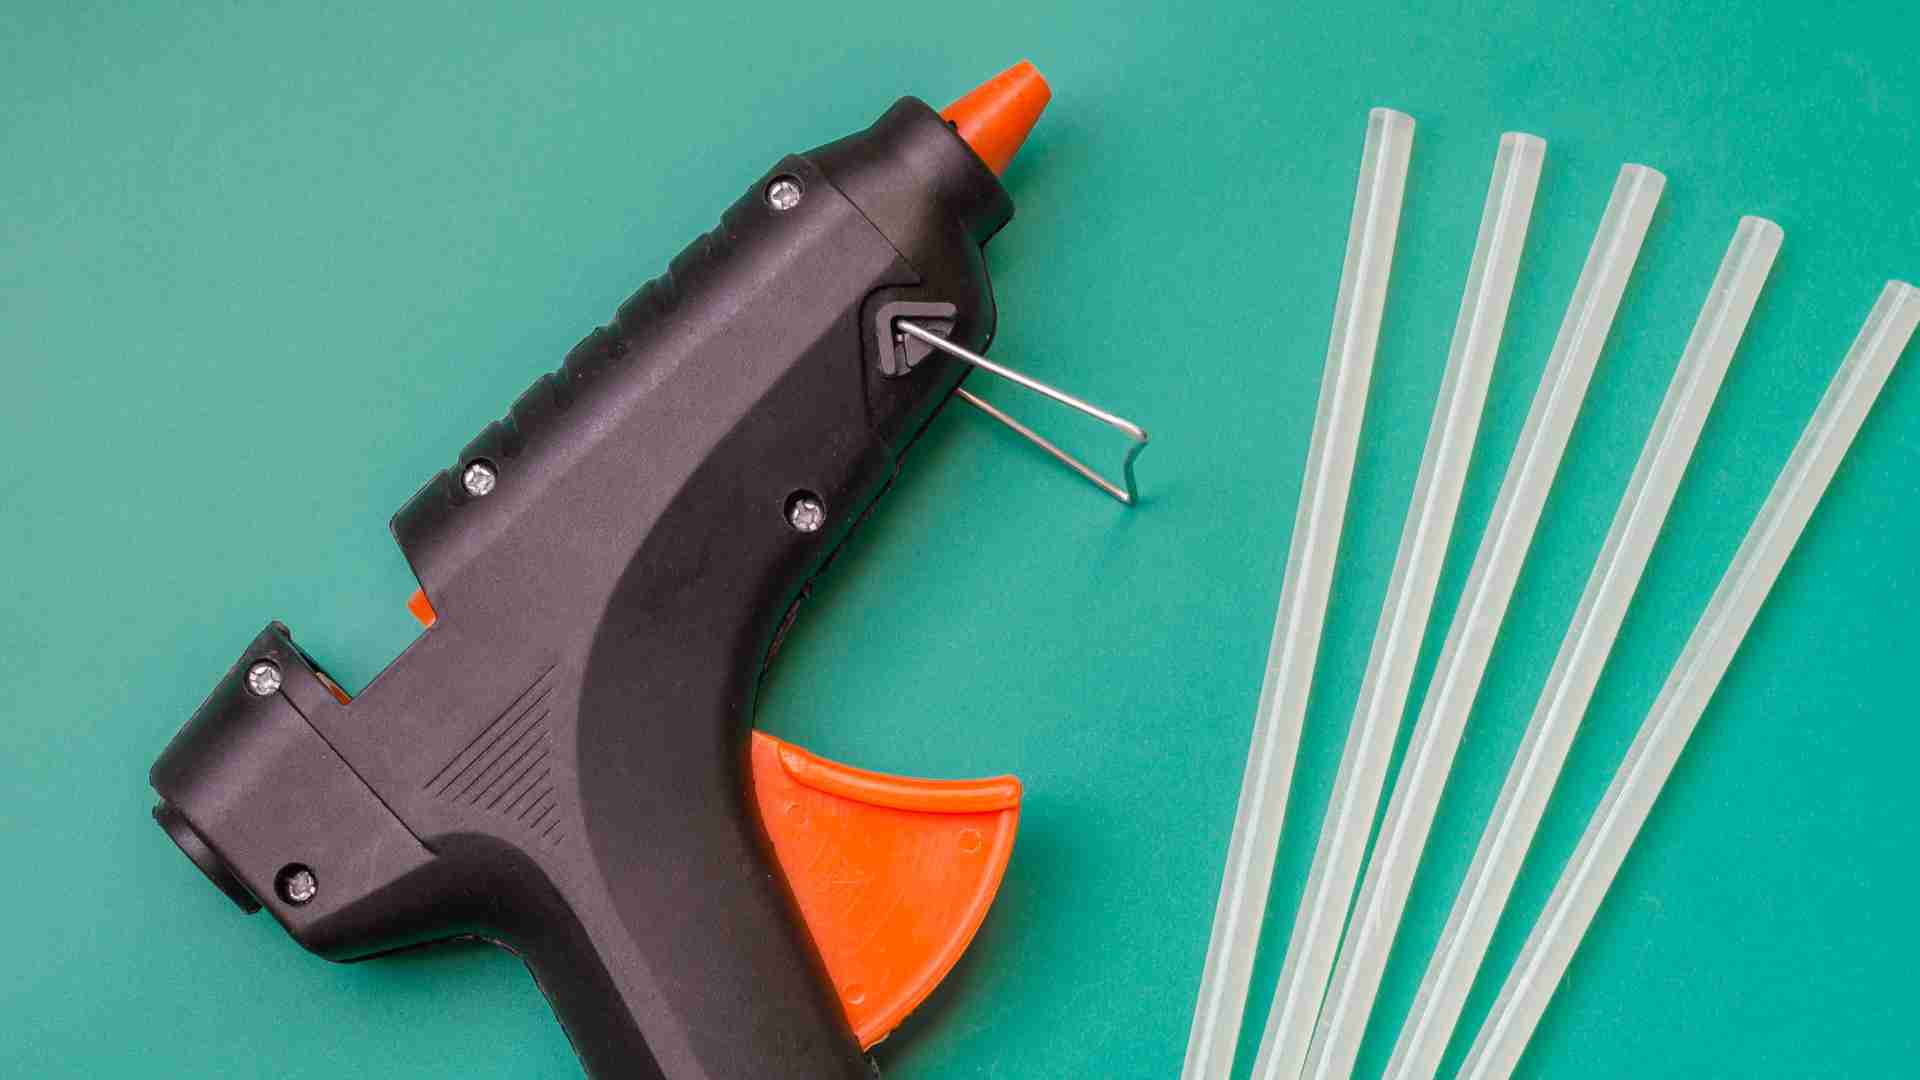 Is Hot Glue Toxic?